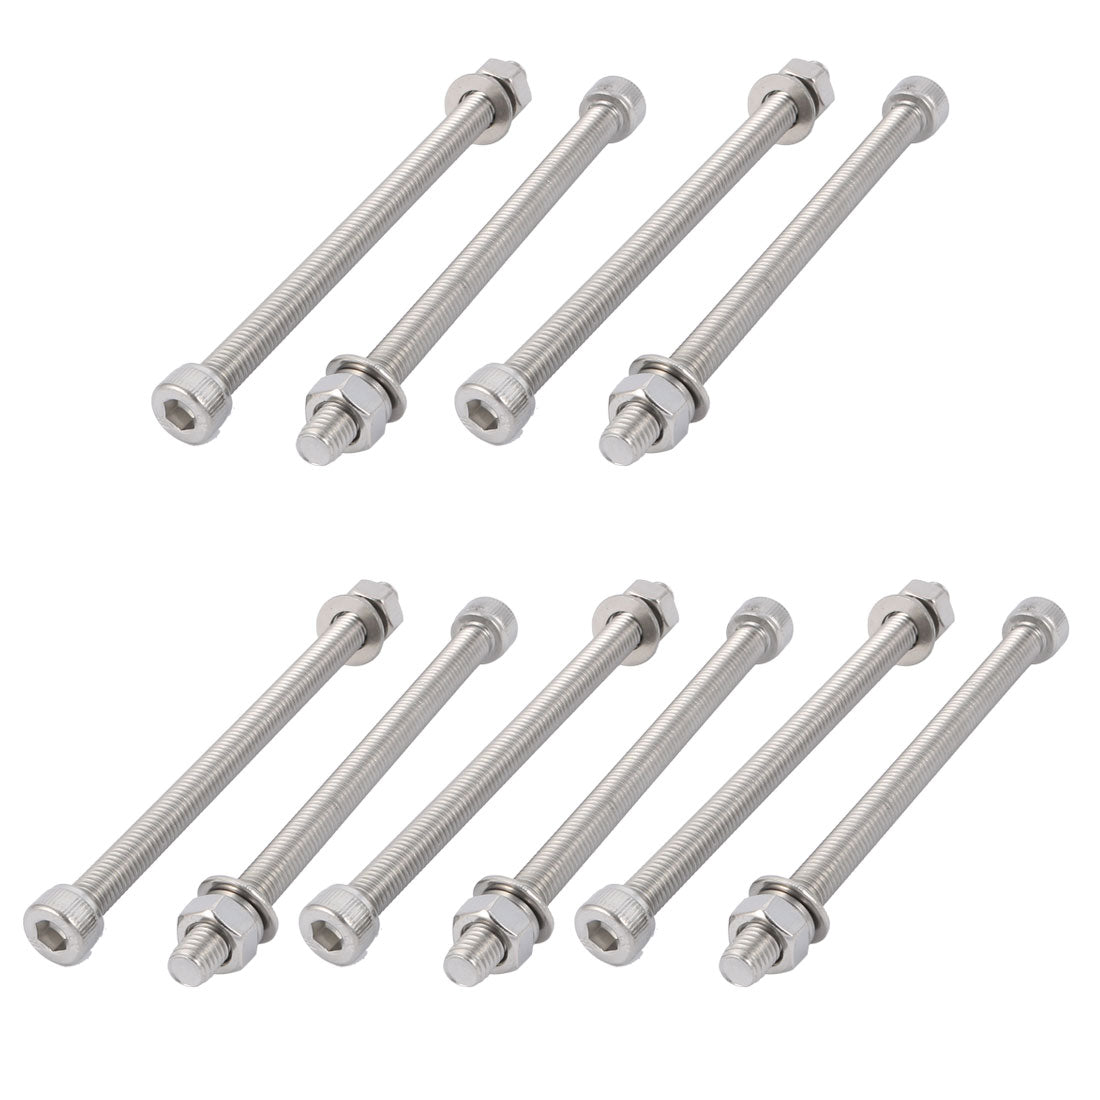 uxcell Uxcell 10Pcs M8x130mm 304 Stainless Steel Knurled Hex Socket Head Bolt Nut Set w Washer